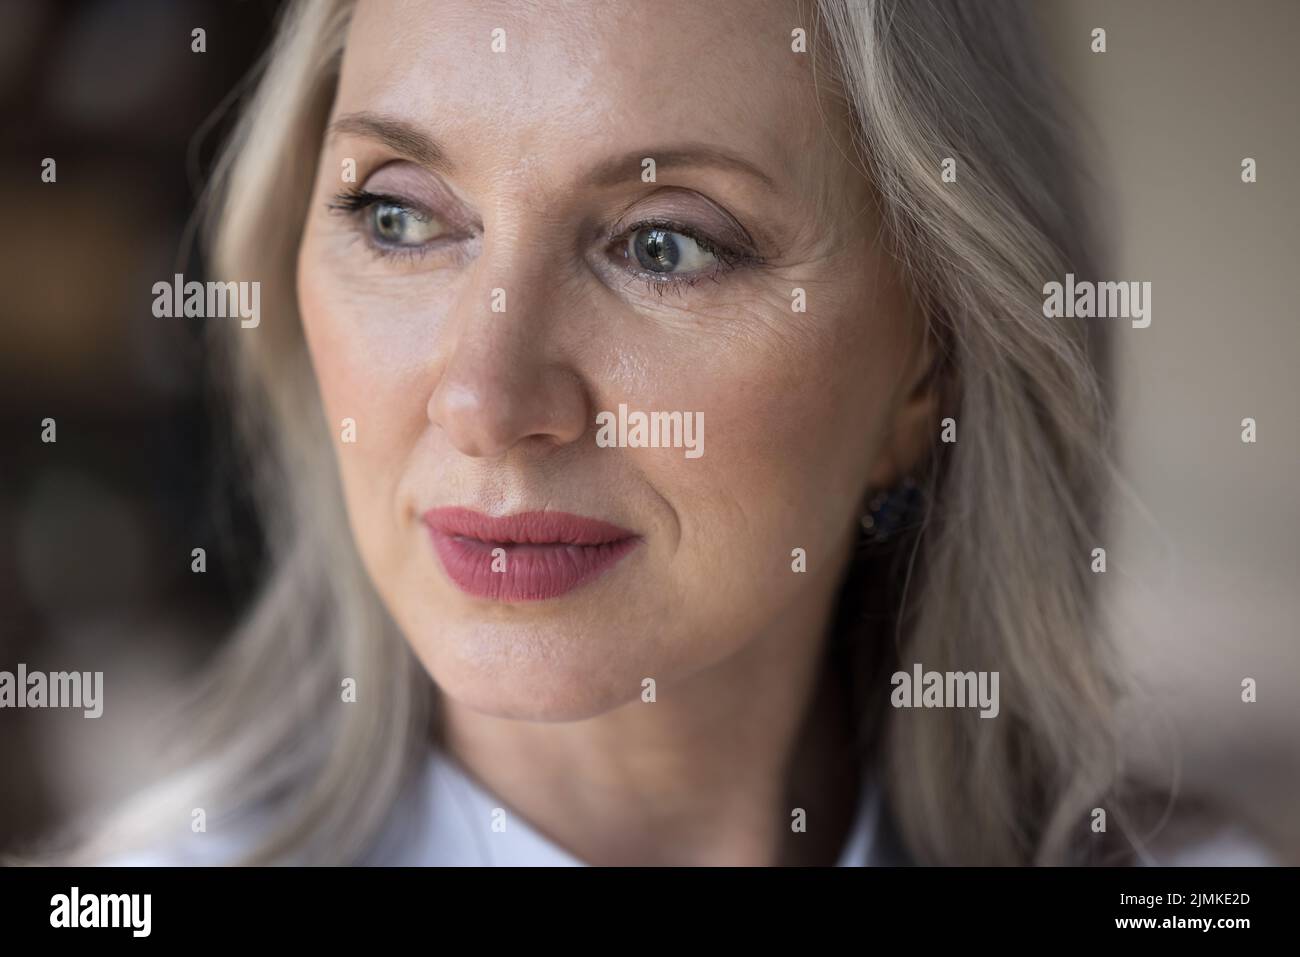 Pensive dreamy middle aged senior woman face close up Stock Photo